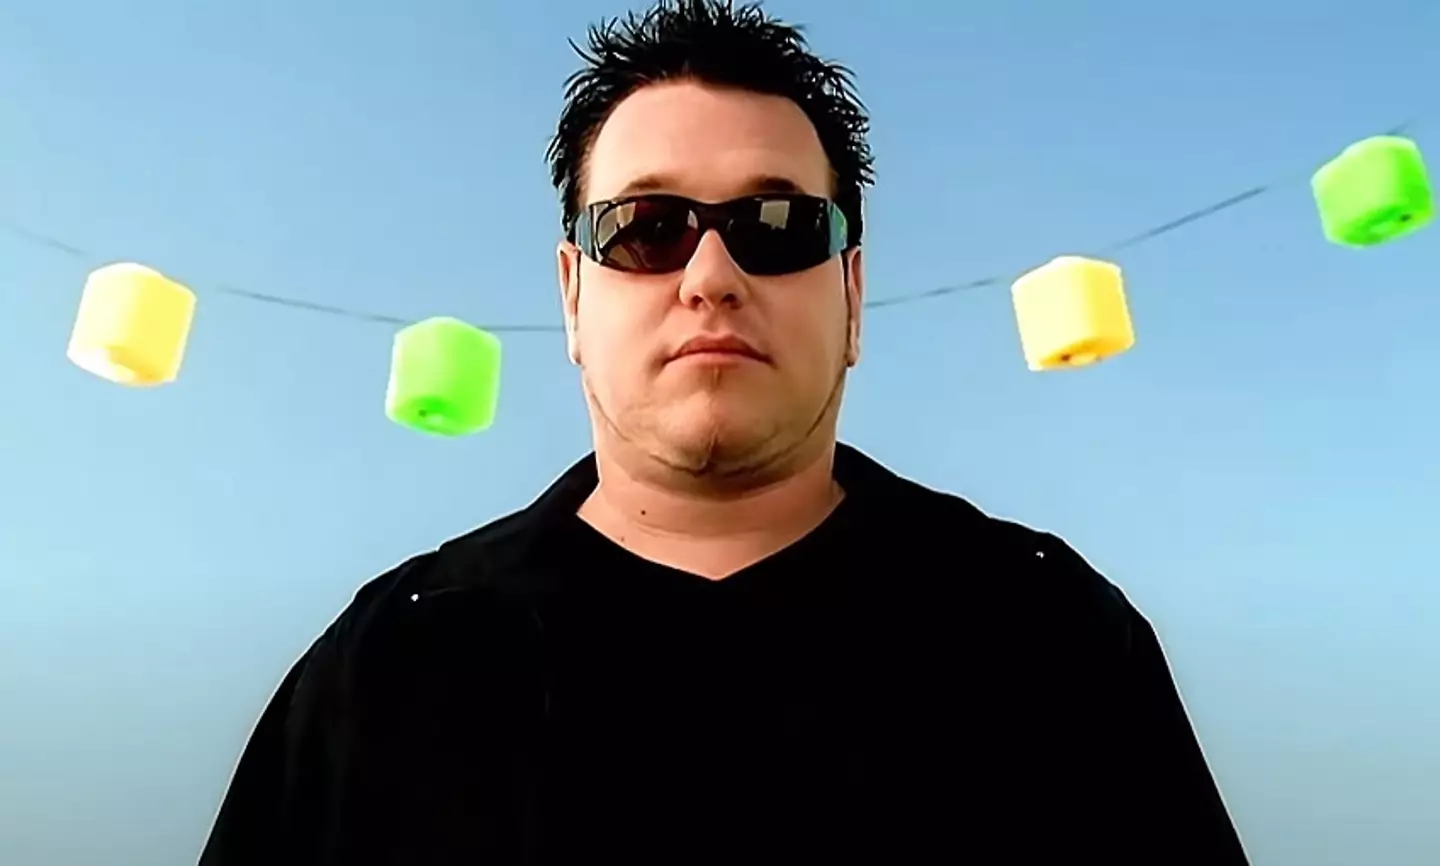 Harwell was a lead singer for Smash Mouth.